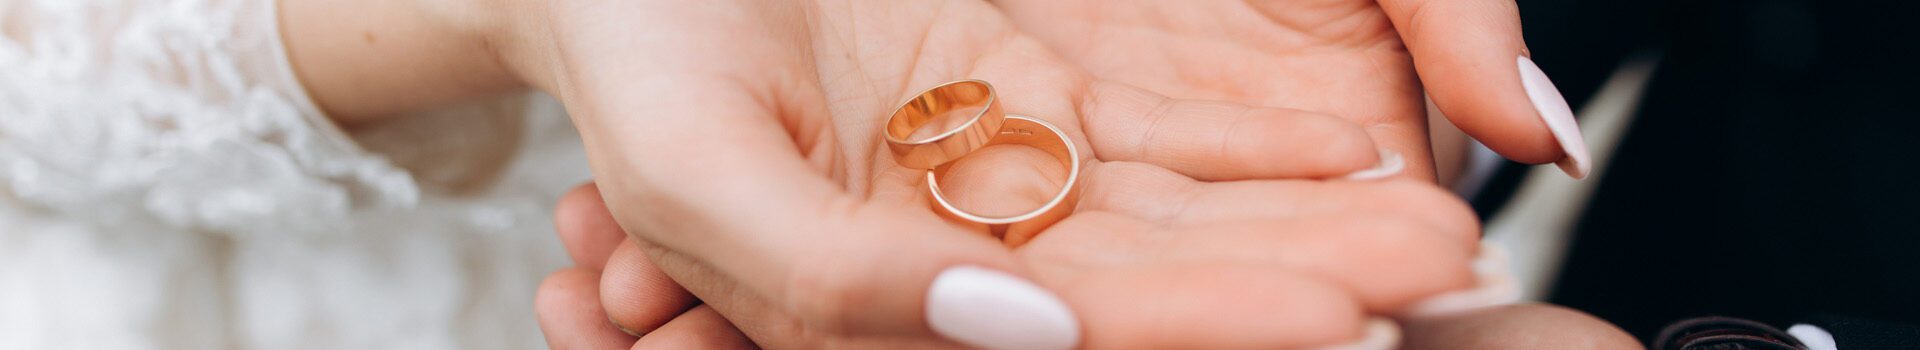 A couple's hands with wedding rings